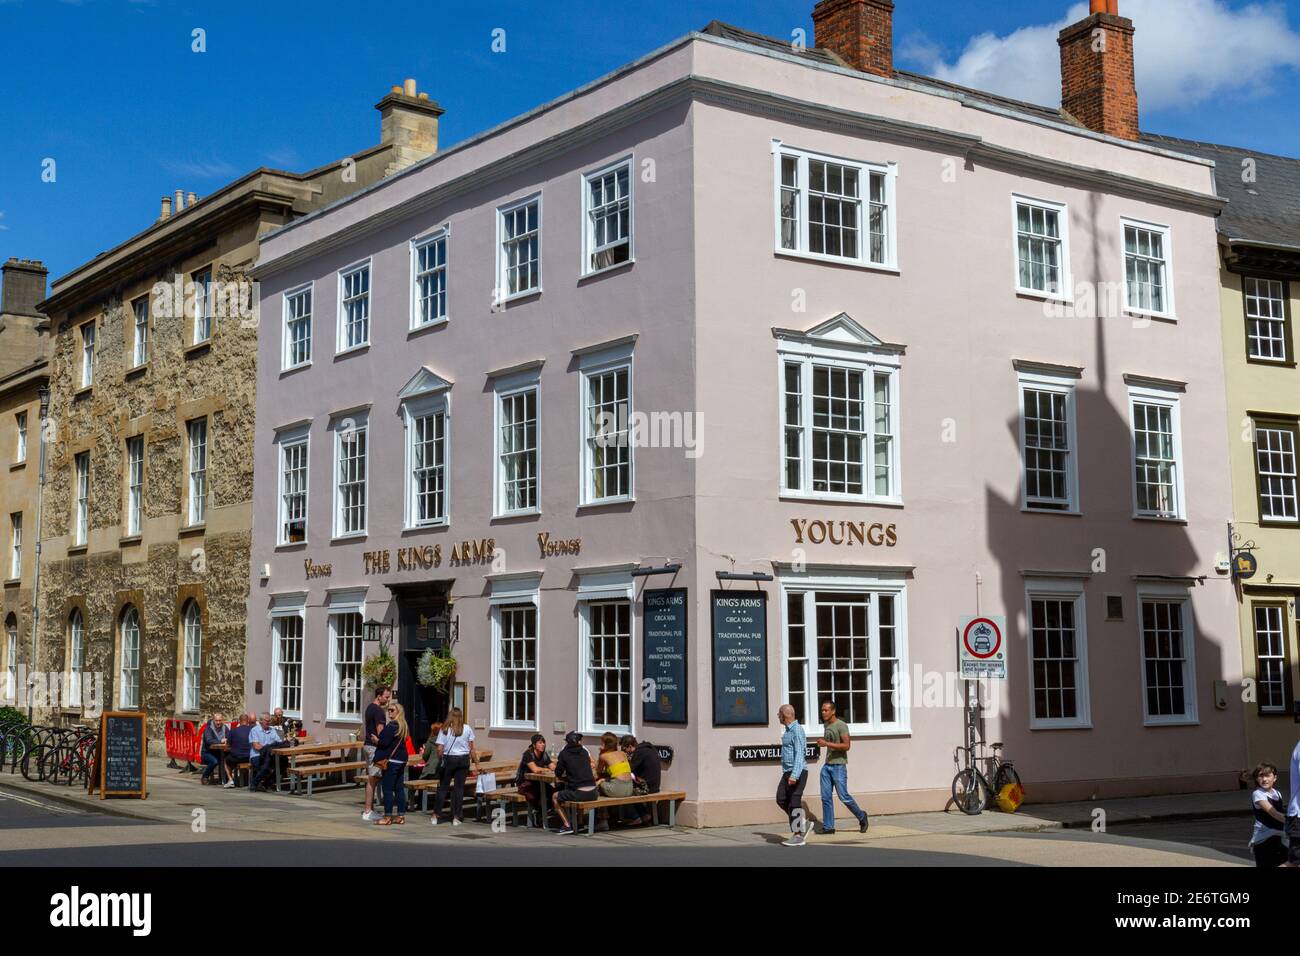 The Kings Arms public house, a famous Young's pub, Oxford, Oxfordshire, UK. Stock Photo